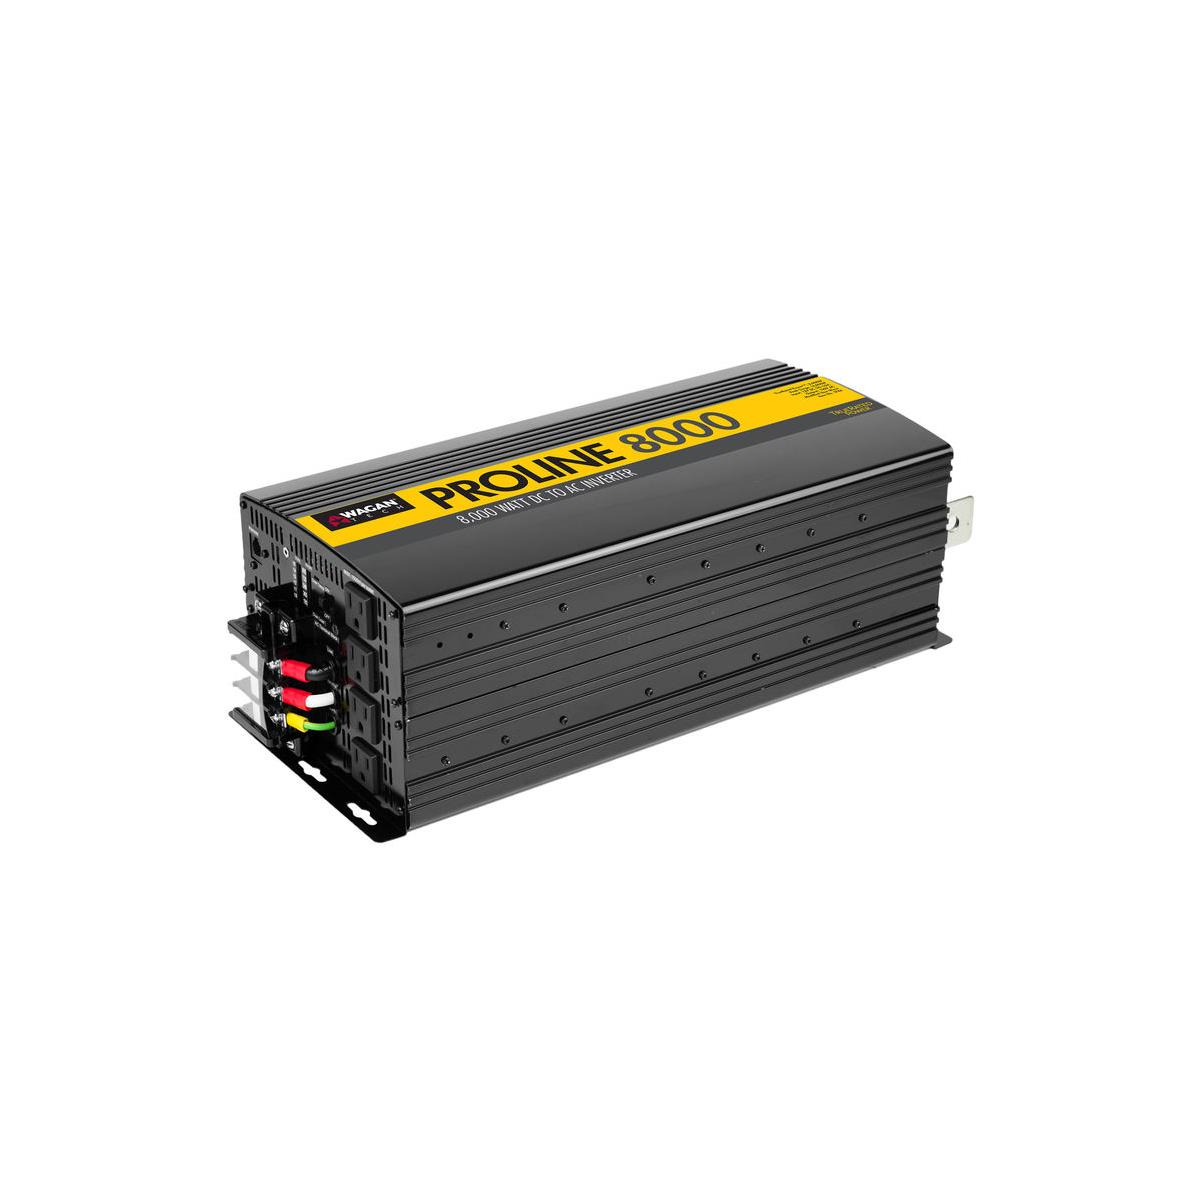 Image of Wagan ProLine 8000W Power Inverter with Remote Switch